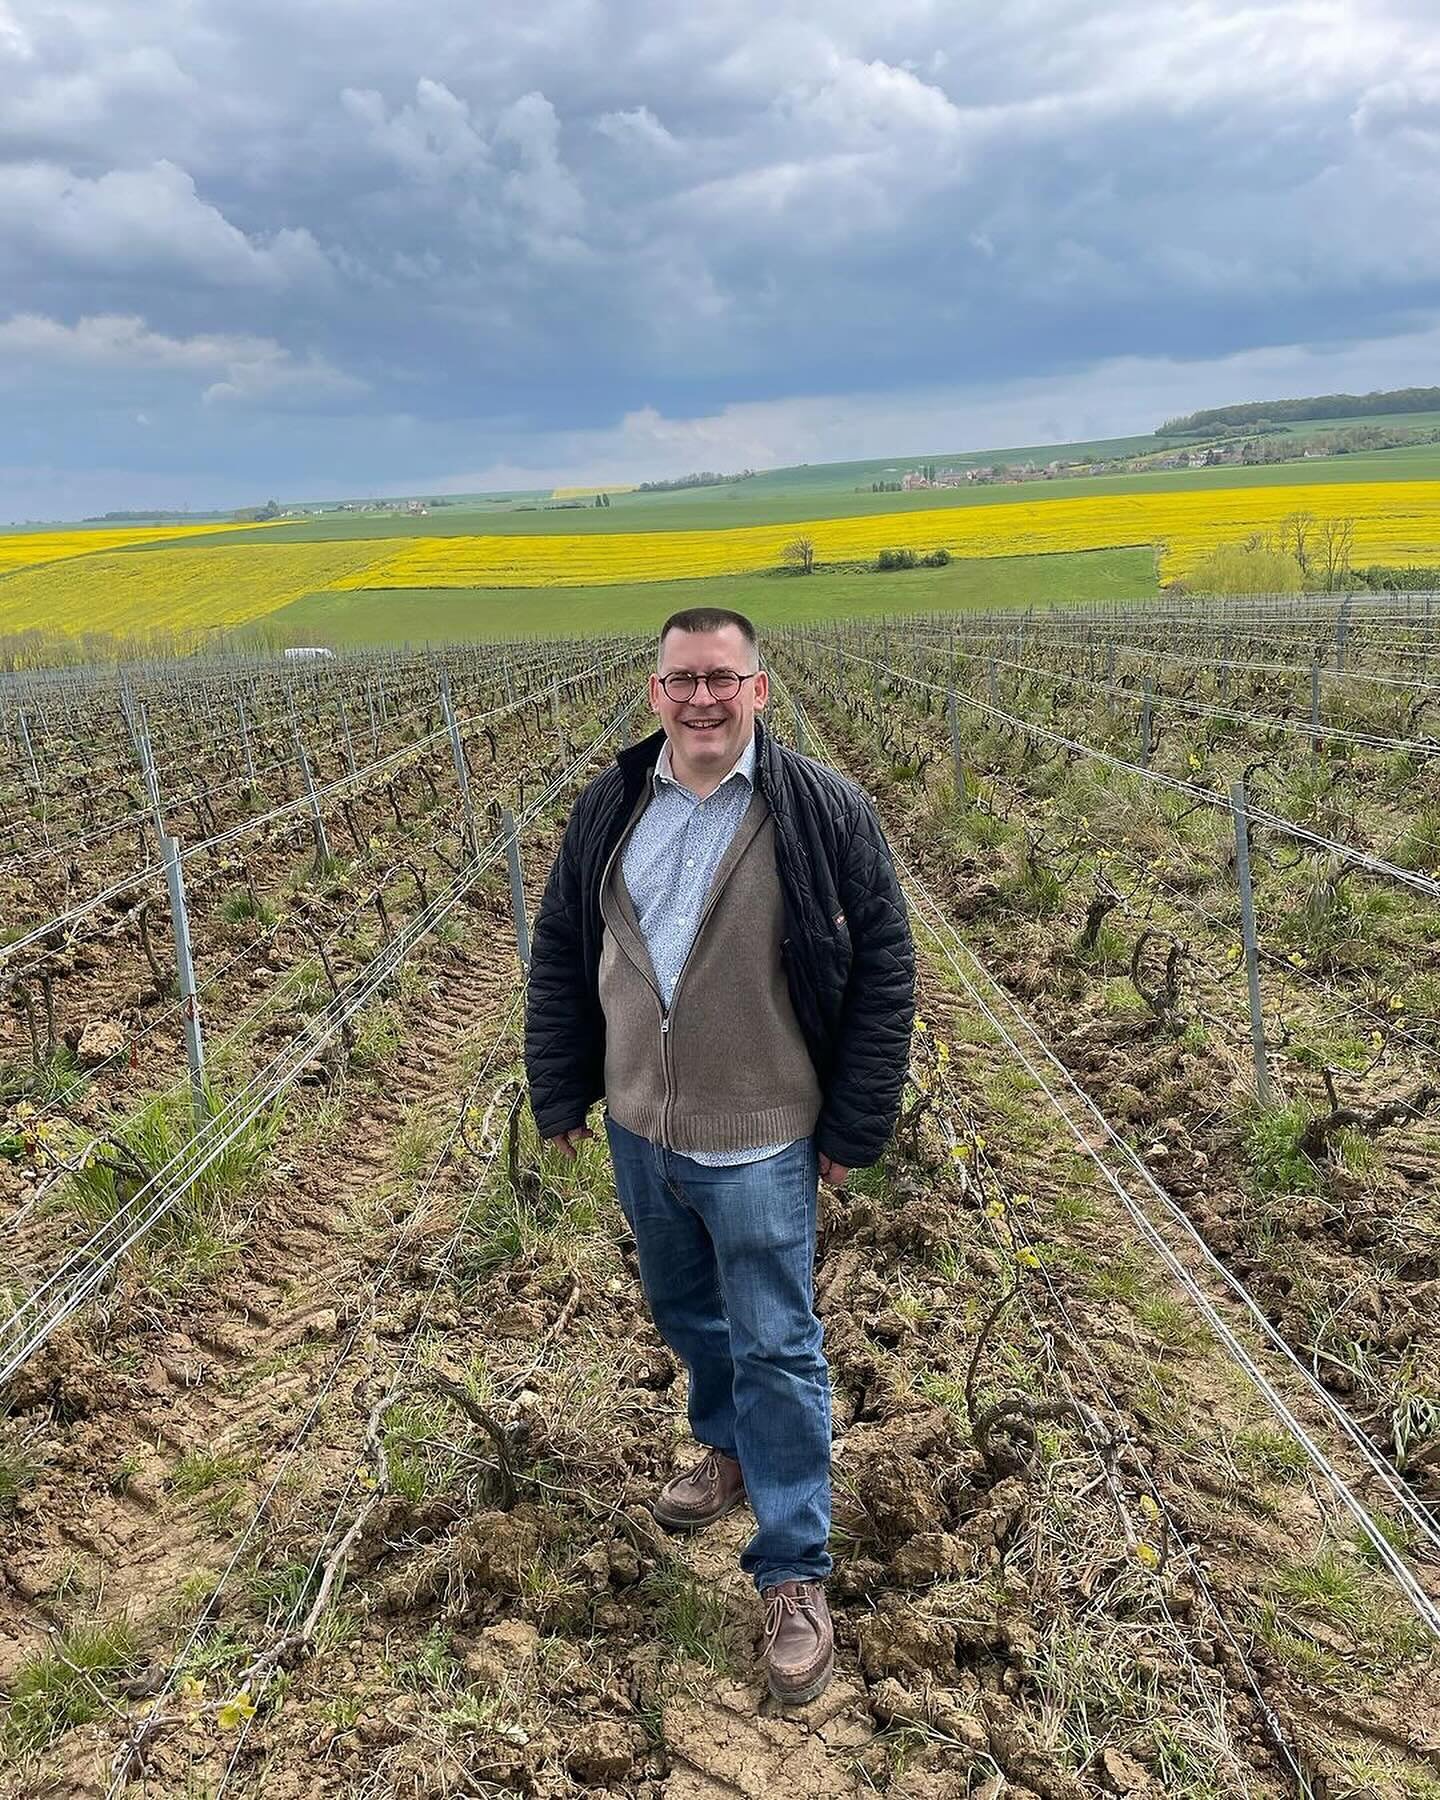 Report from Gary in Champagne: &ldquo;Visiting Aspasie is like coming home. Unfortunately, this magical vineyard has been hit by spring frost, and 10% of the potential crop has already been lost. As Paul always says, there are plenty of bottles in th